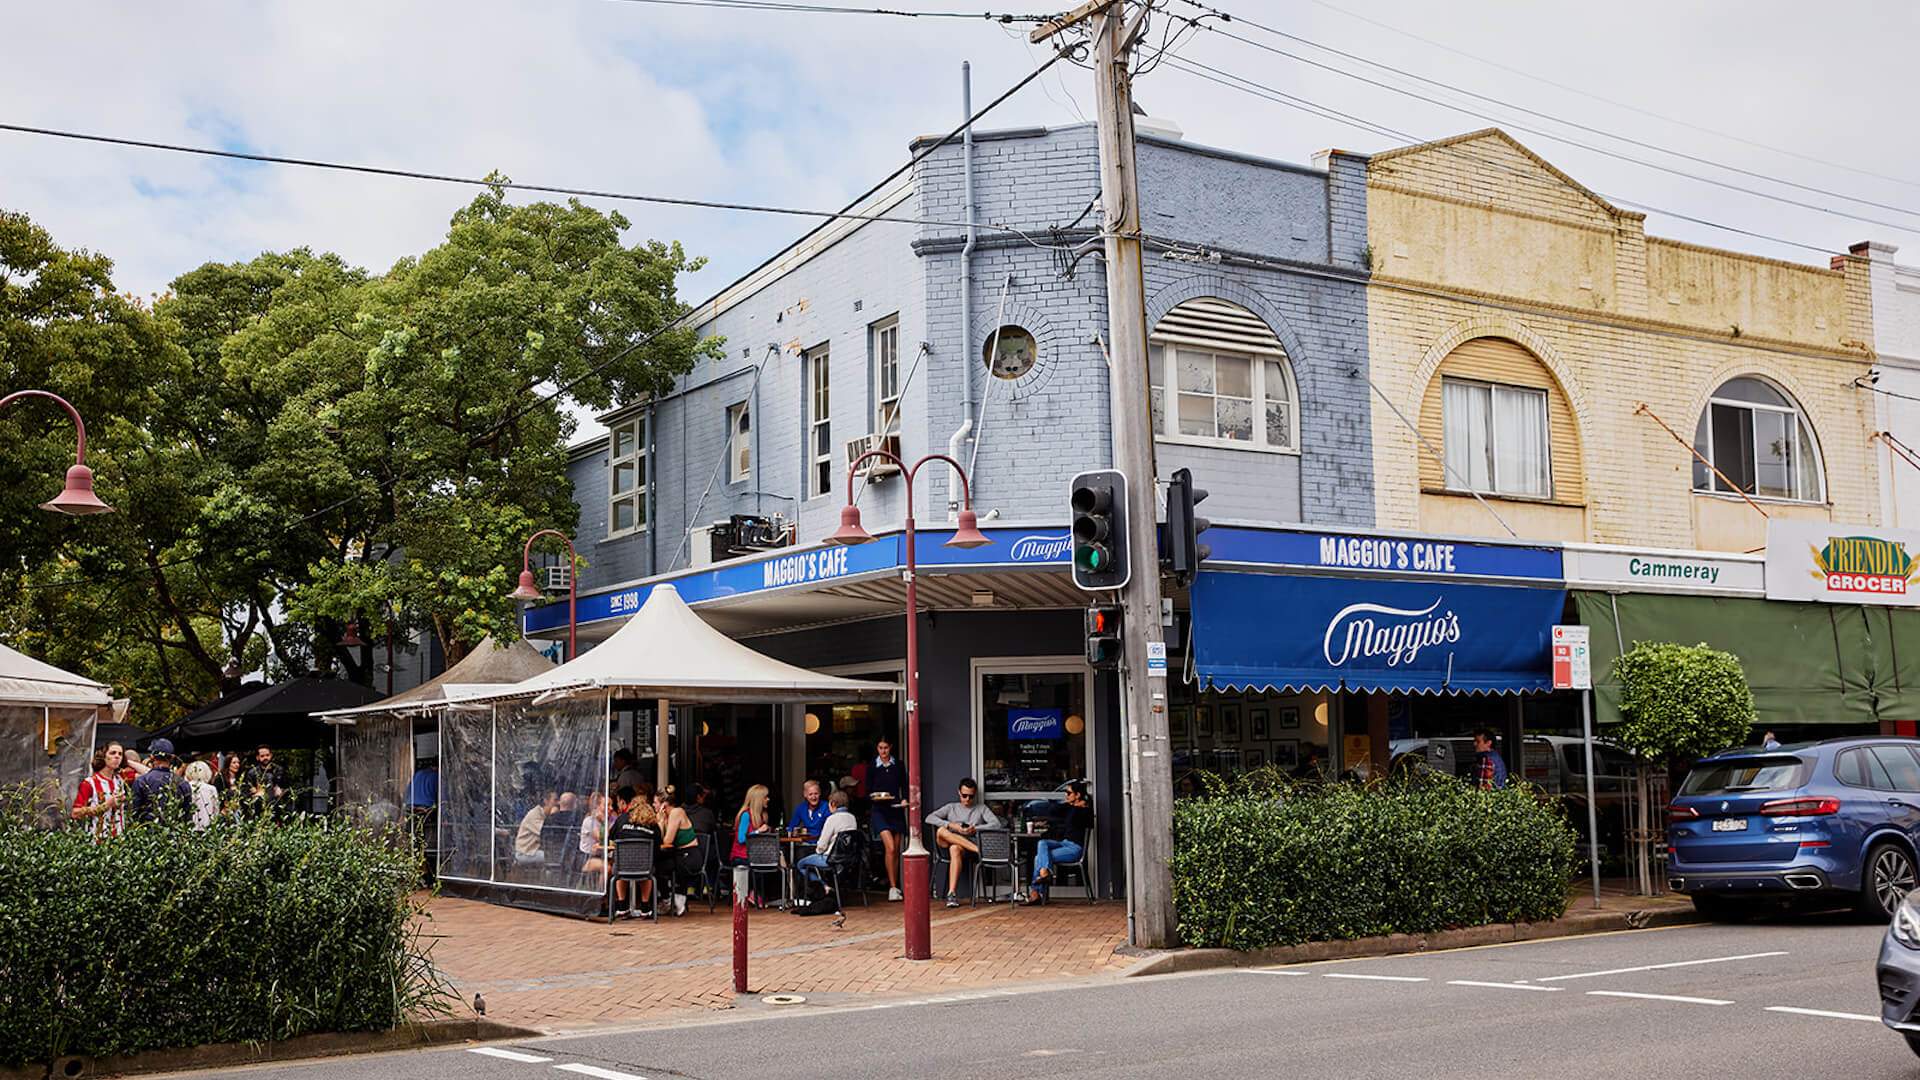 The exterior of maggio's cafe - one of the best cafes in Sydney